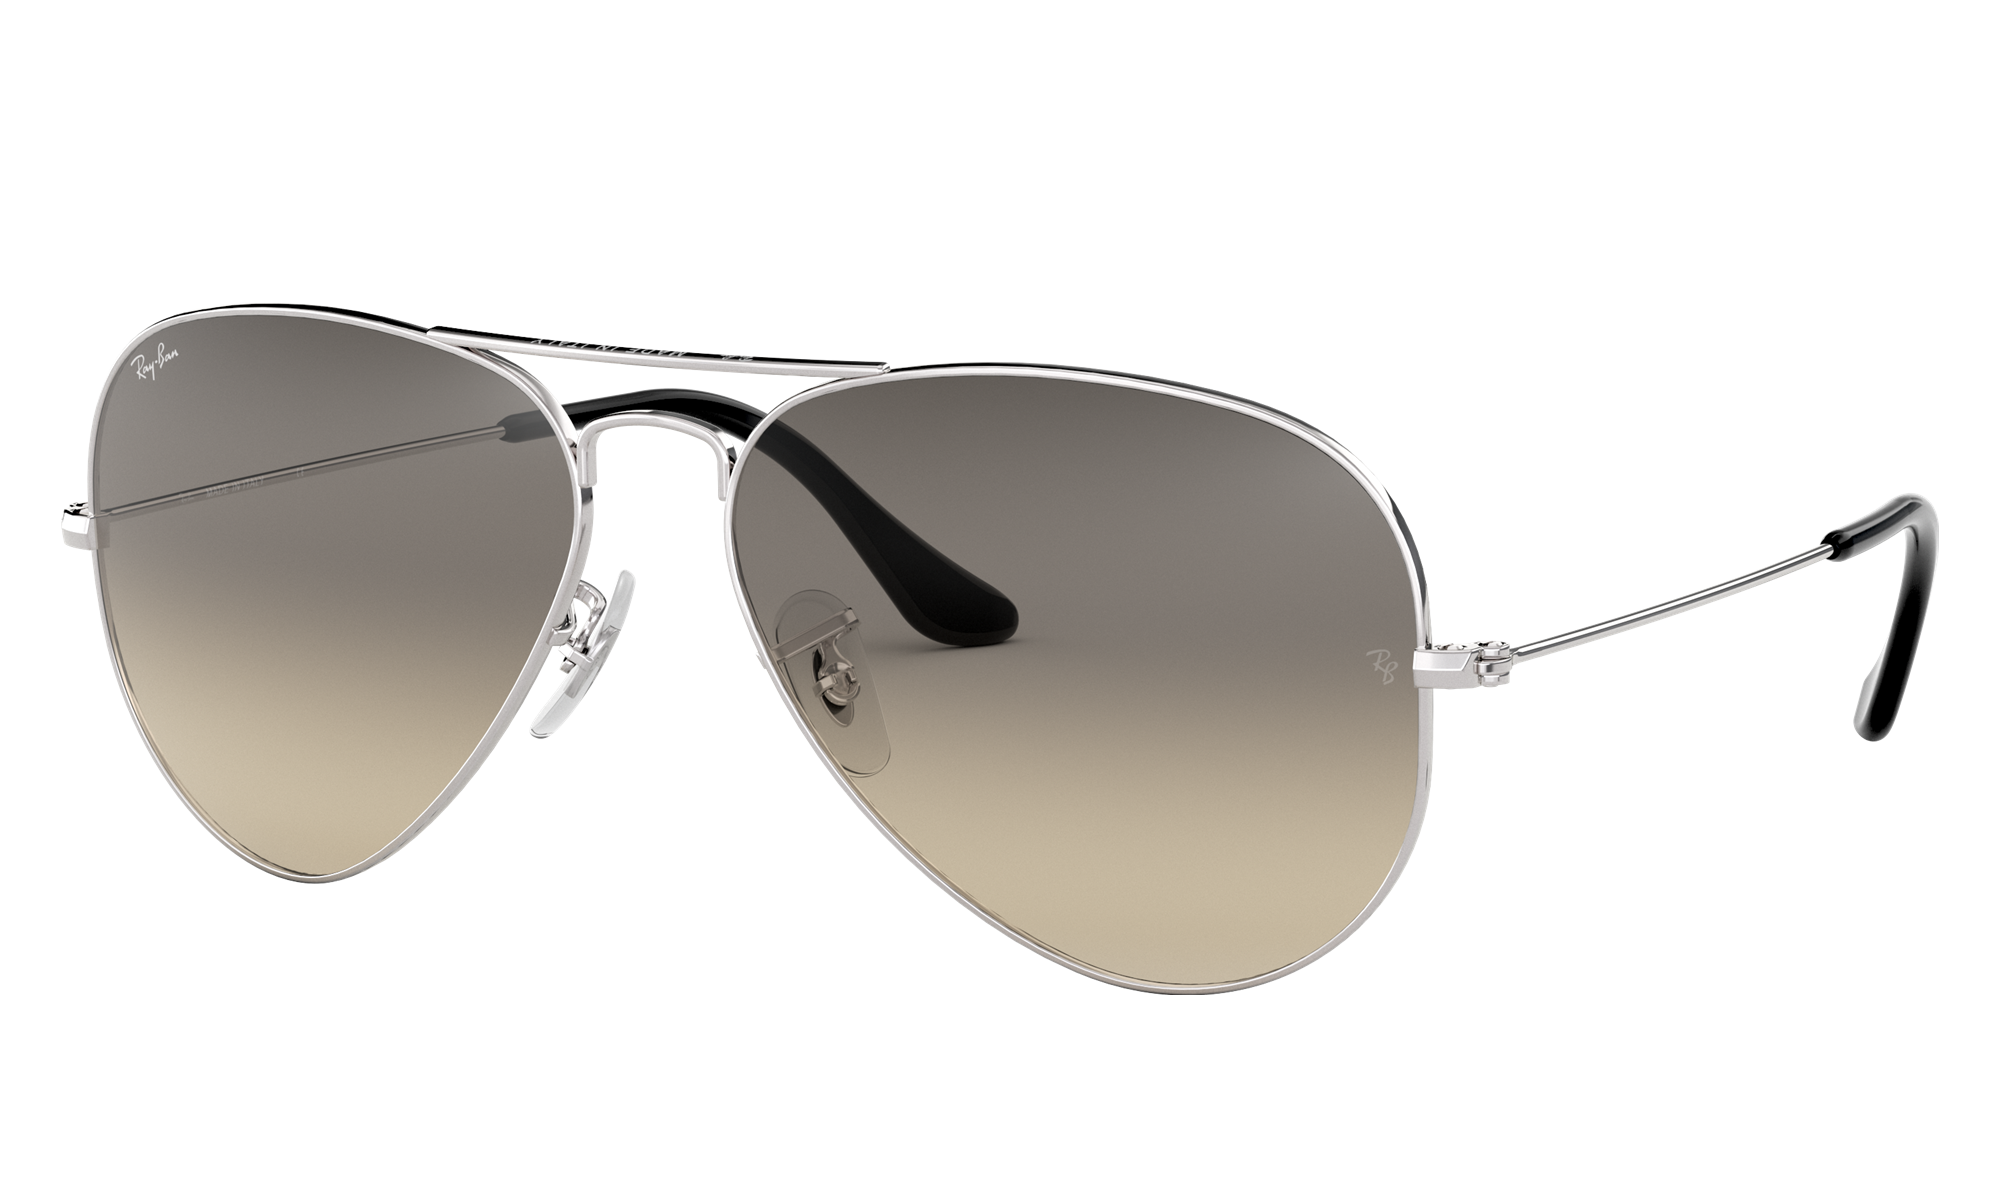 Ray-Ban Unisex Rb3025 Silver Size: Extra Large